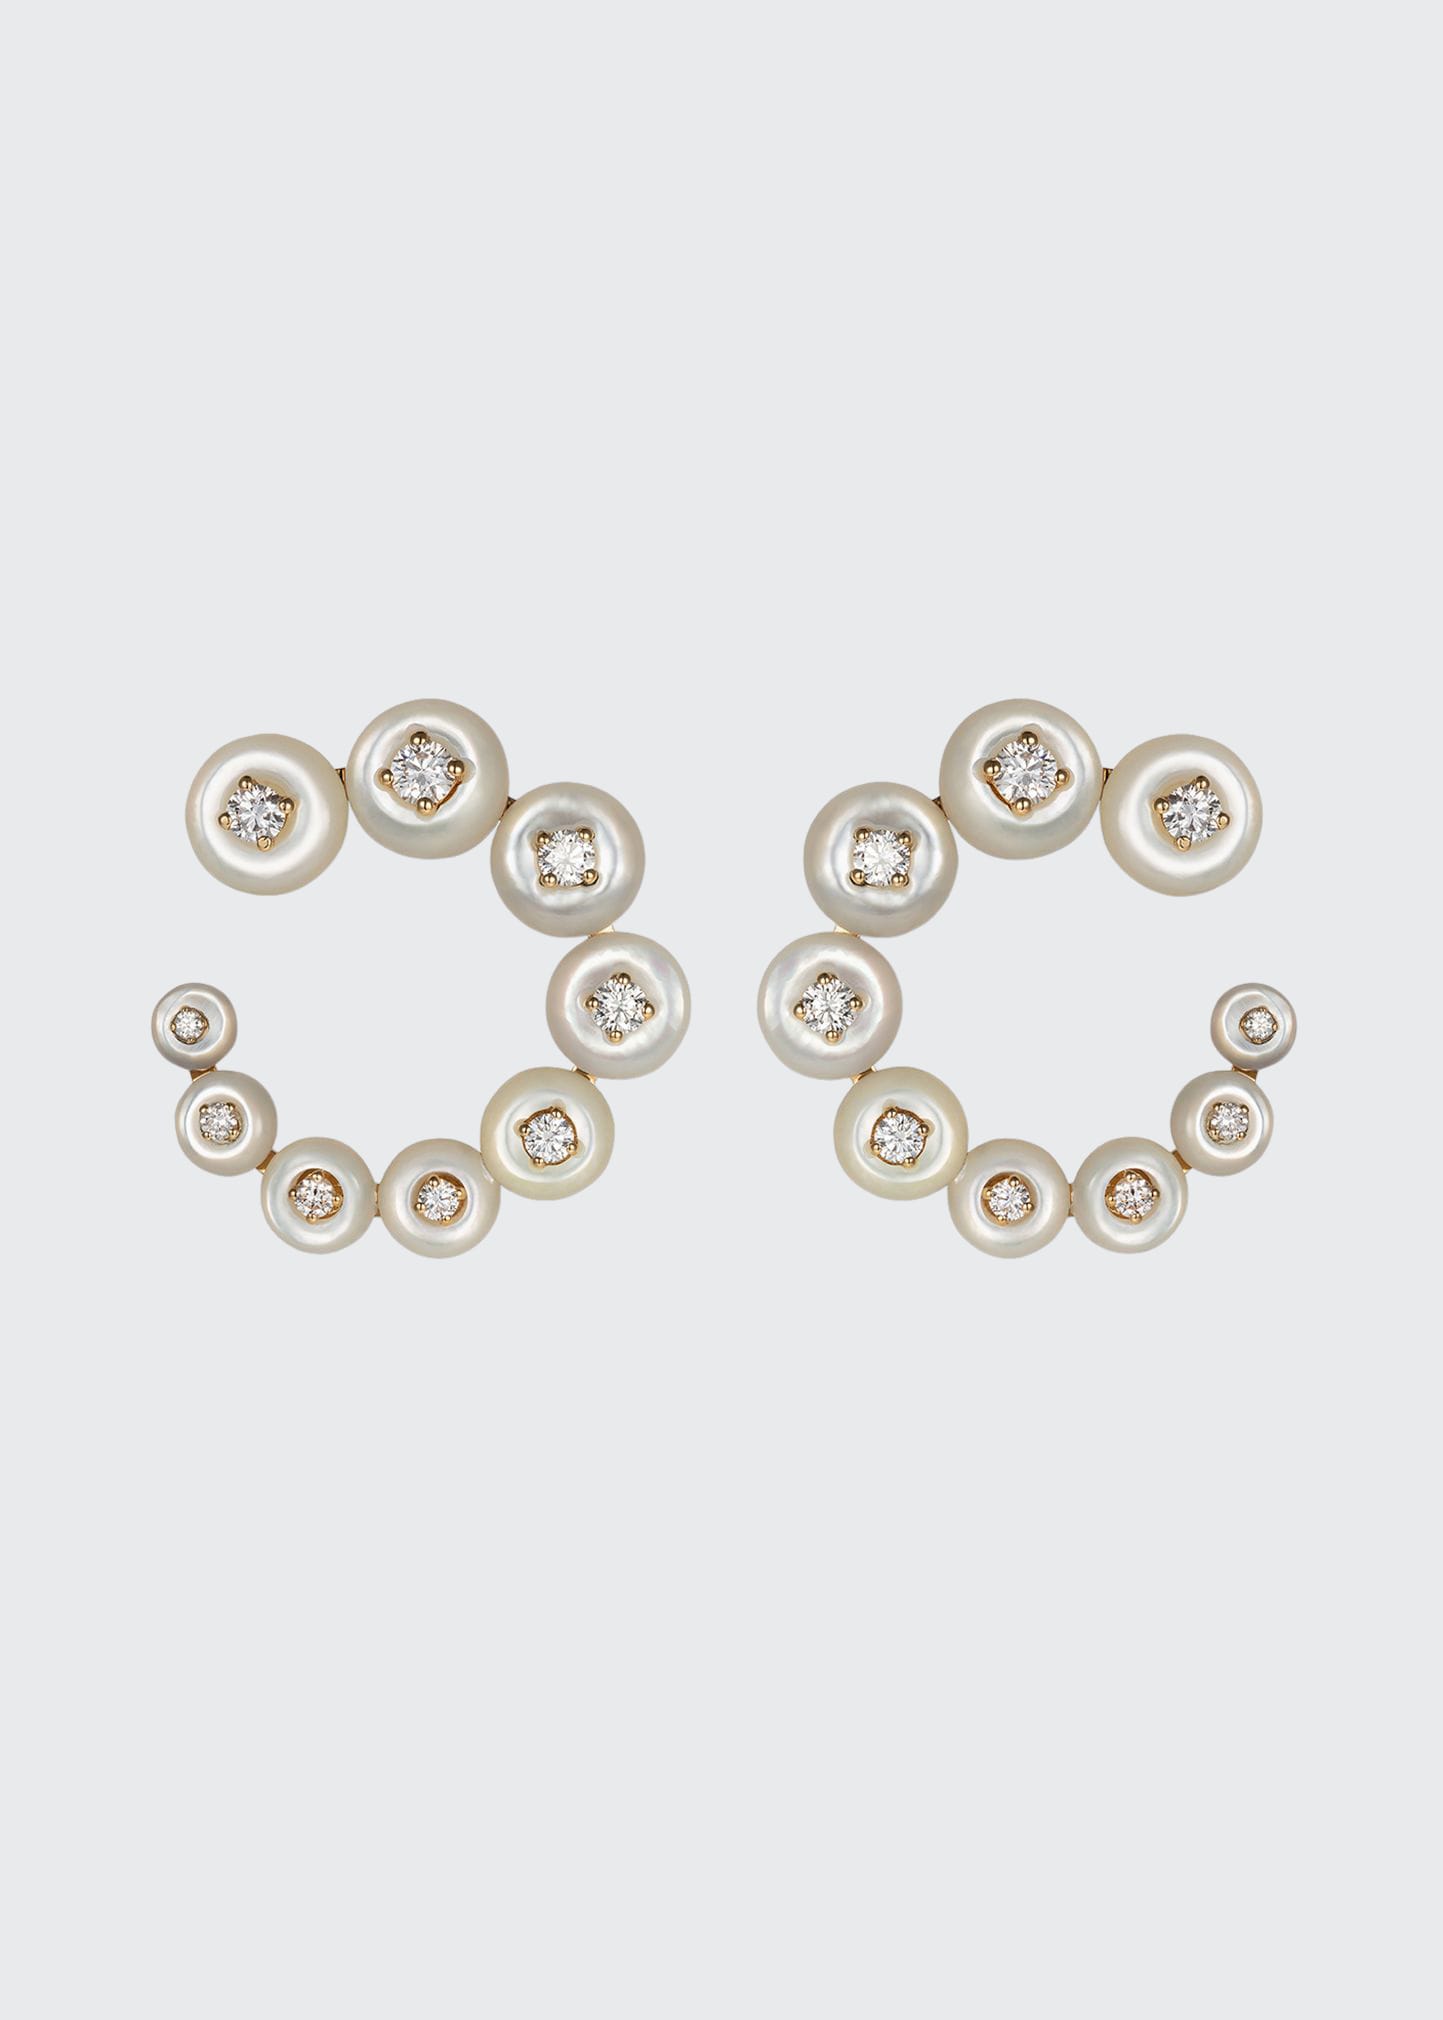 Fernando Jorge Surrounding Small Circle Earrings with Mother-of-Pearl